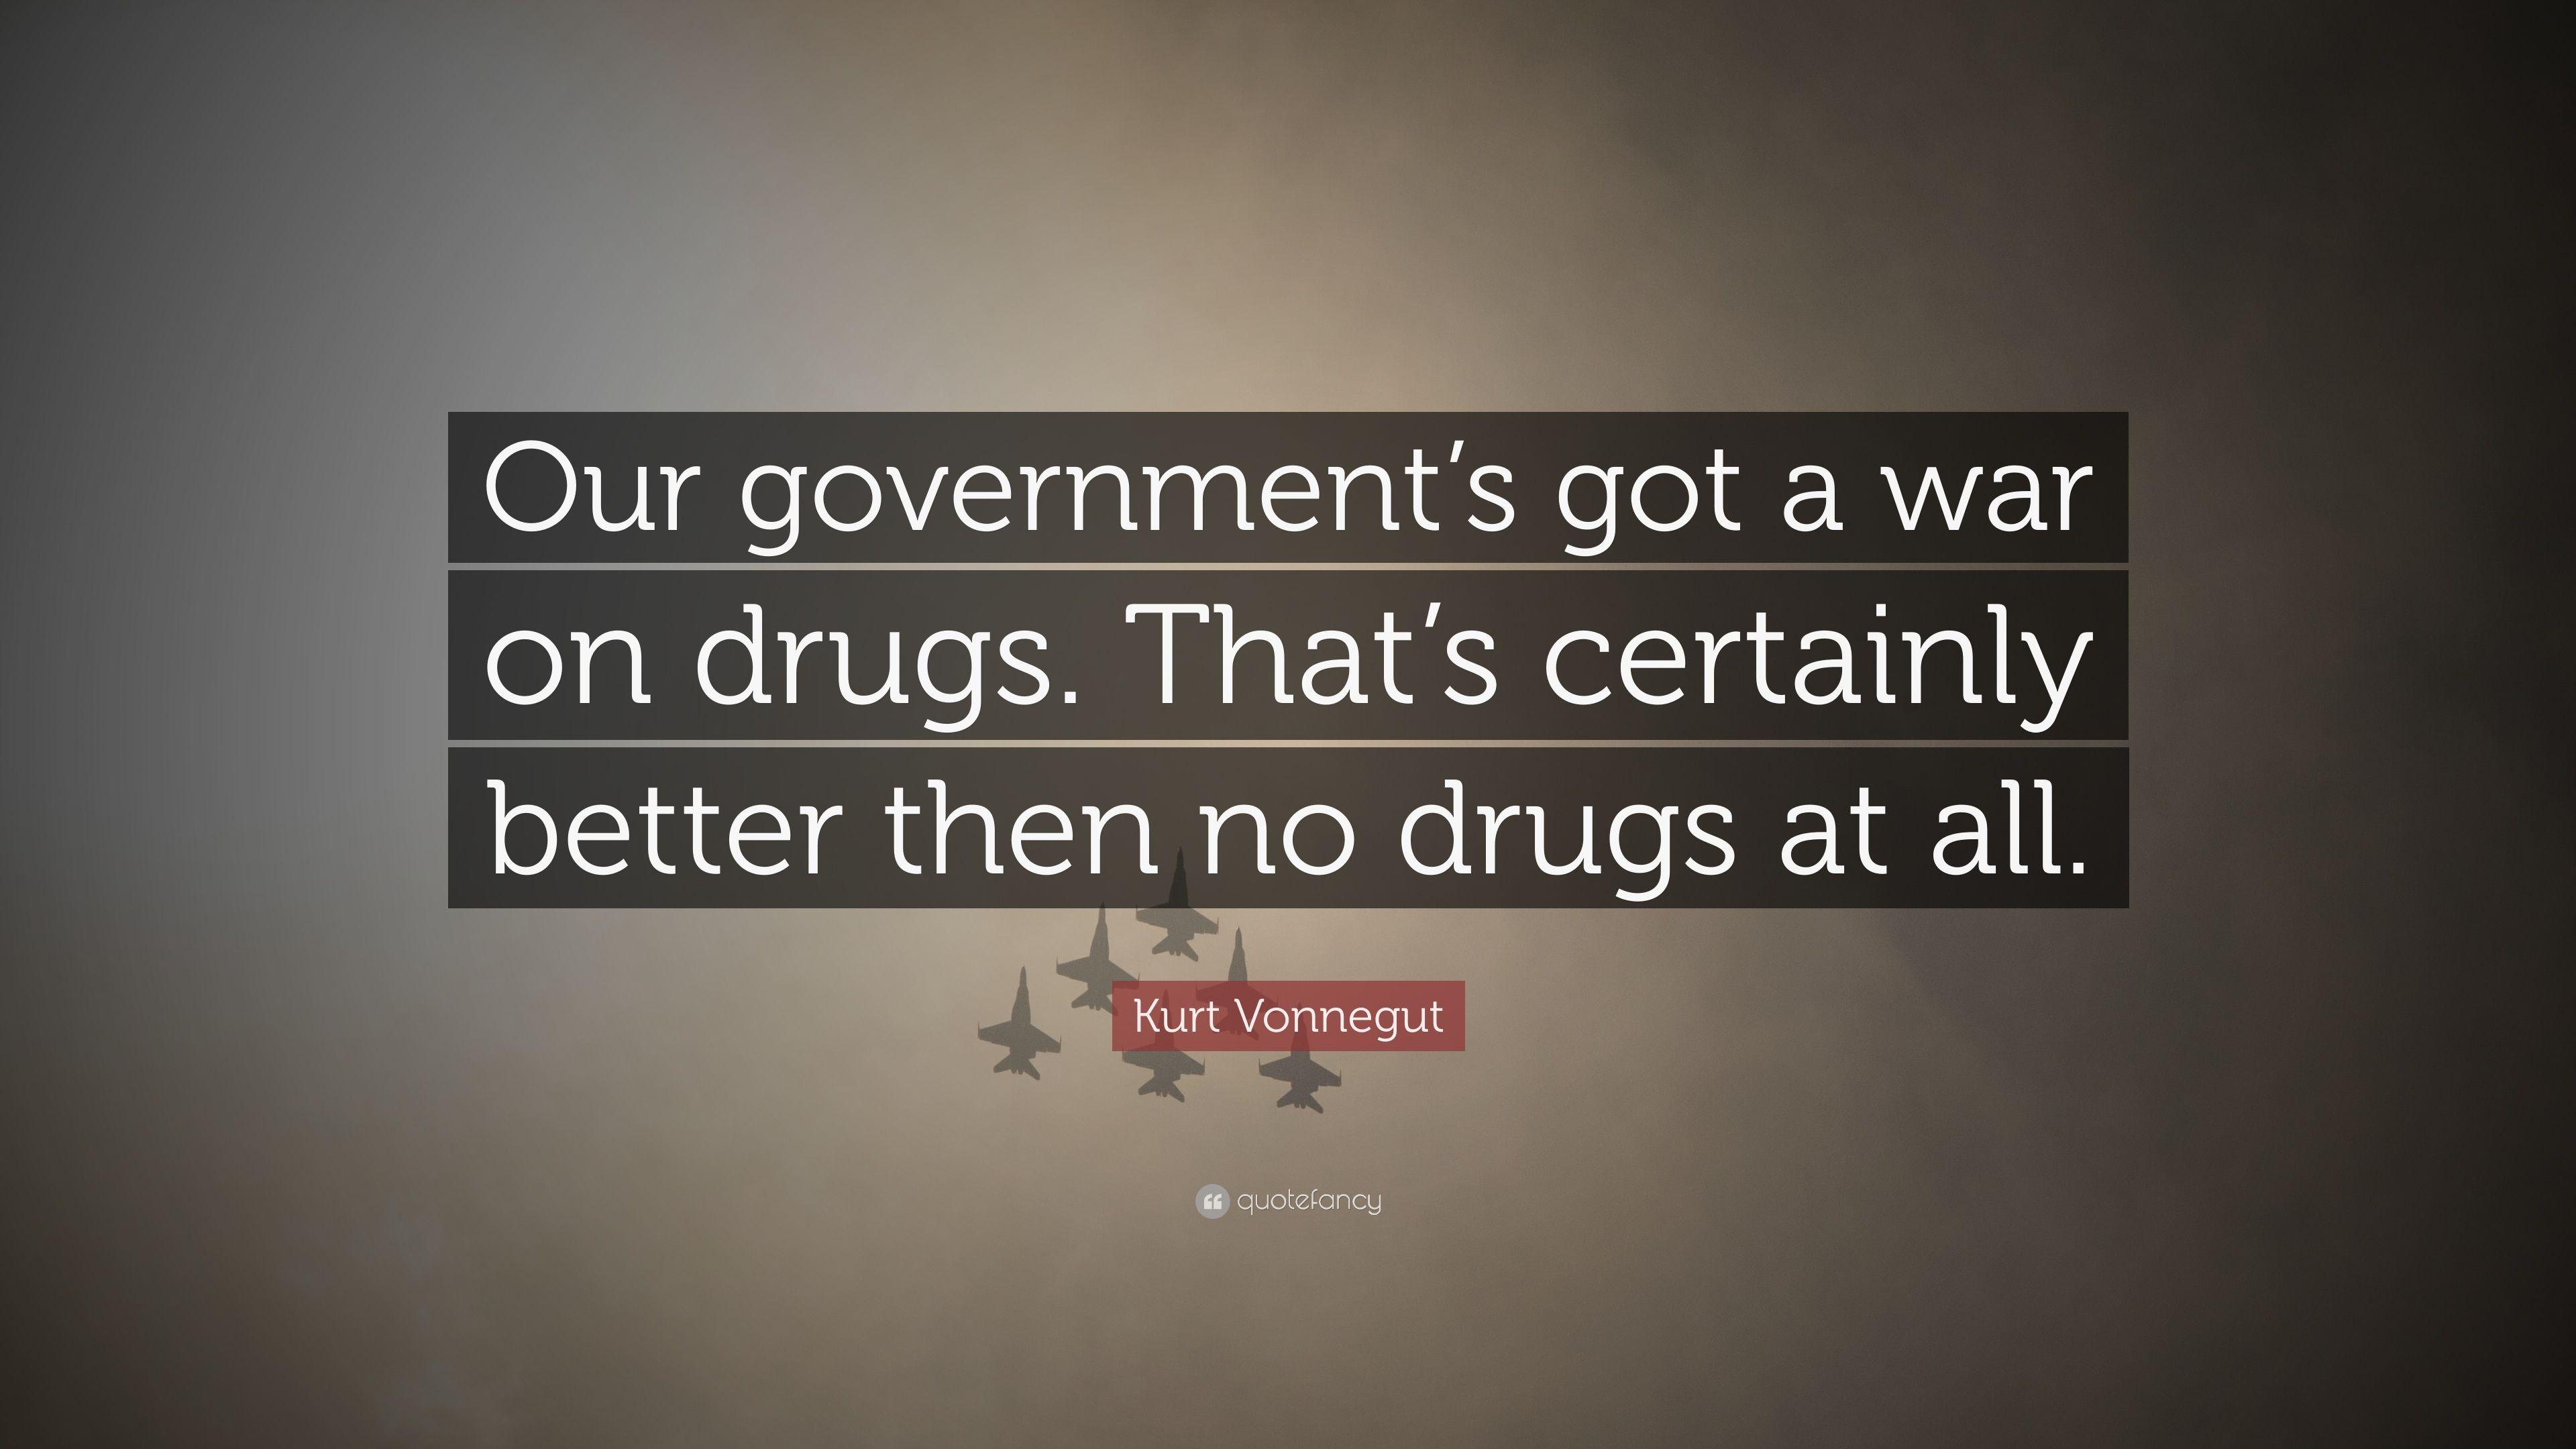 Kurt Vonnegut Quote: “Our government's got a war on drugs. That's